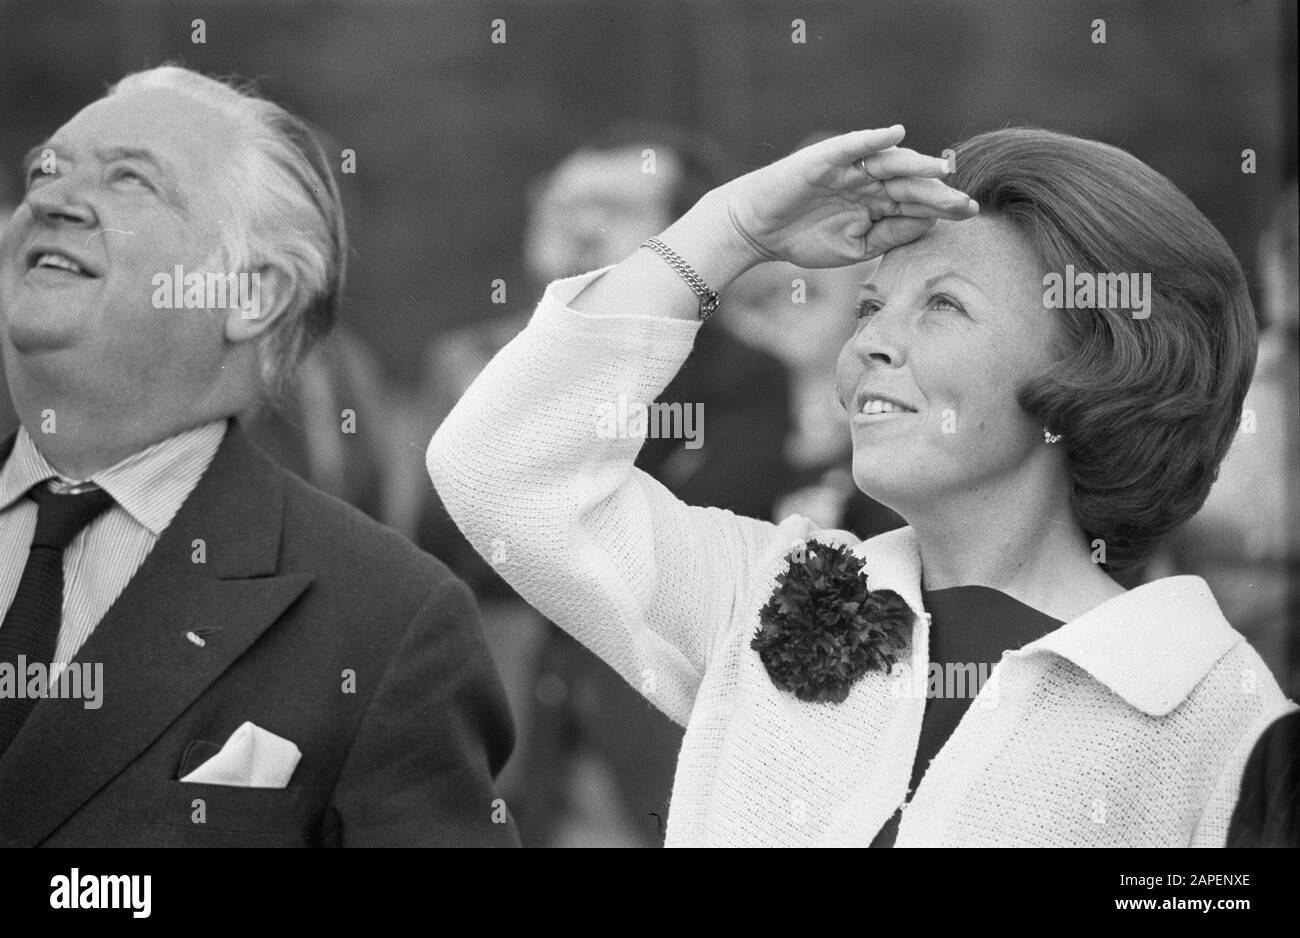 Visit Princess Beatrix to Papendal, Beatrix viewing demonstration skydiving now together with Lord Killami (chairman IOC) Date: May 21, 1976 Keywords: PARACHUTES, visits, demonstrations, princesses, chairmen Personal name: Beatrix, princess, Killamin, Lord Institutional name: Papendal Stock Photo